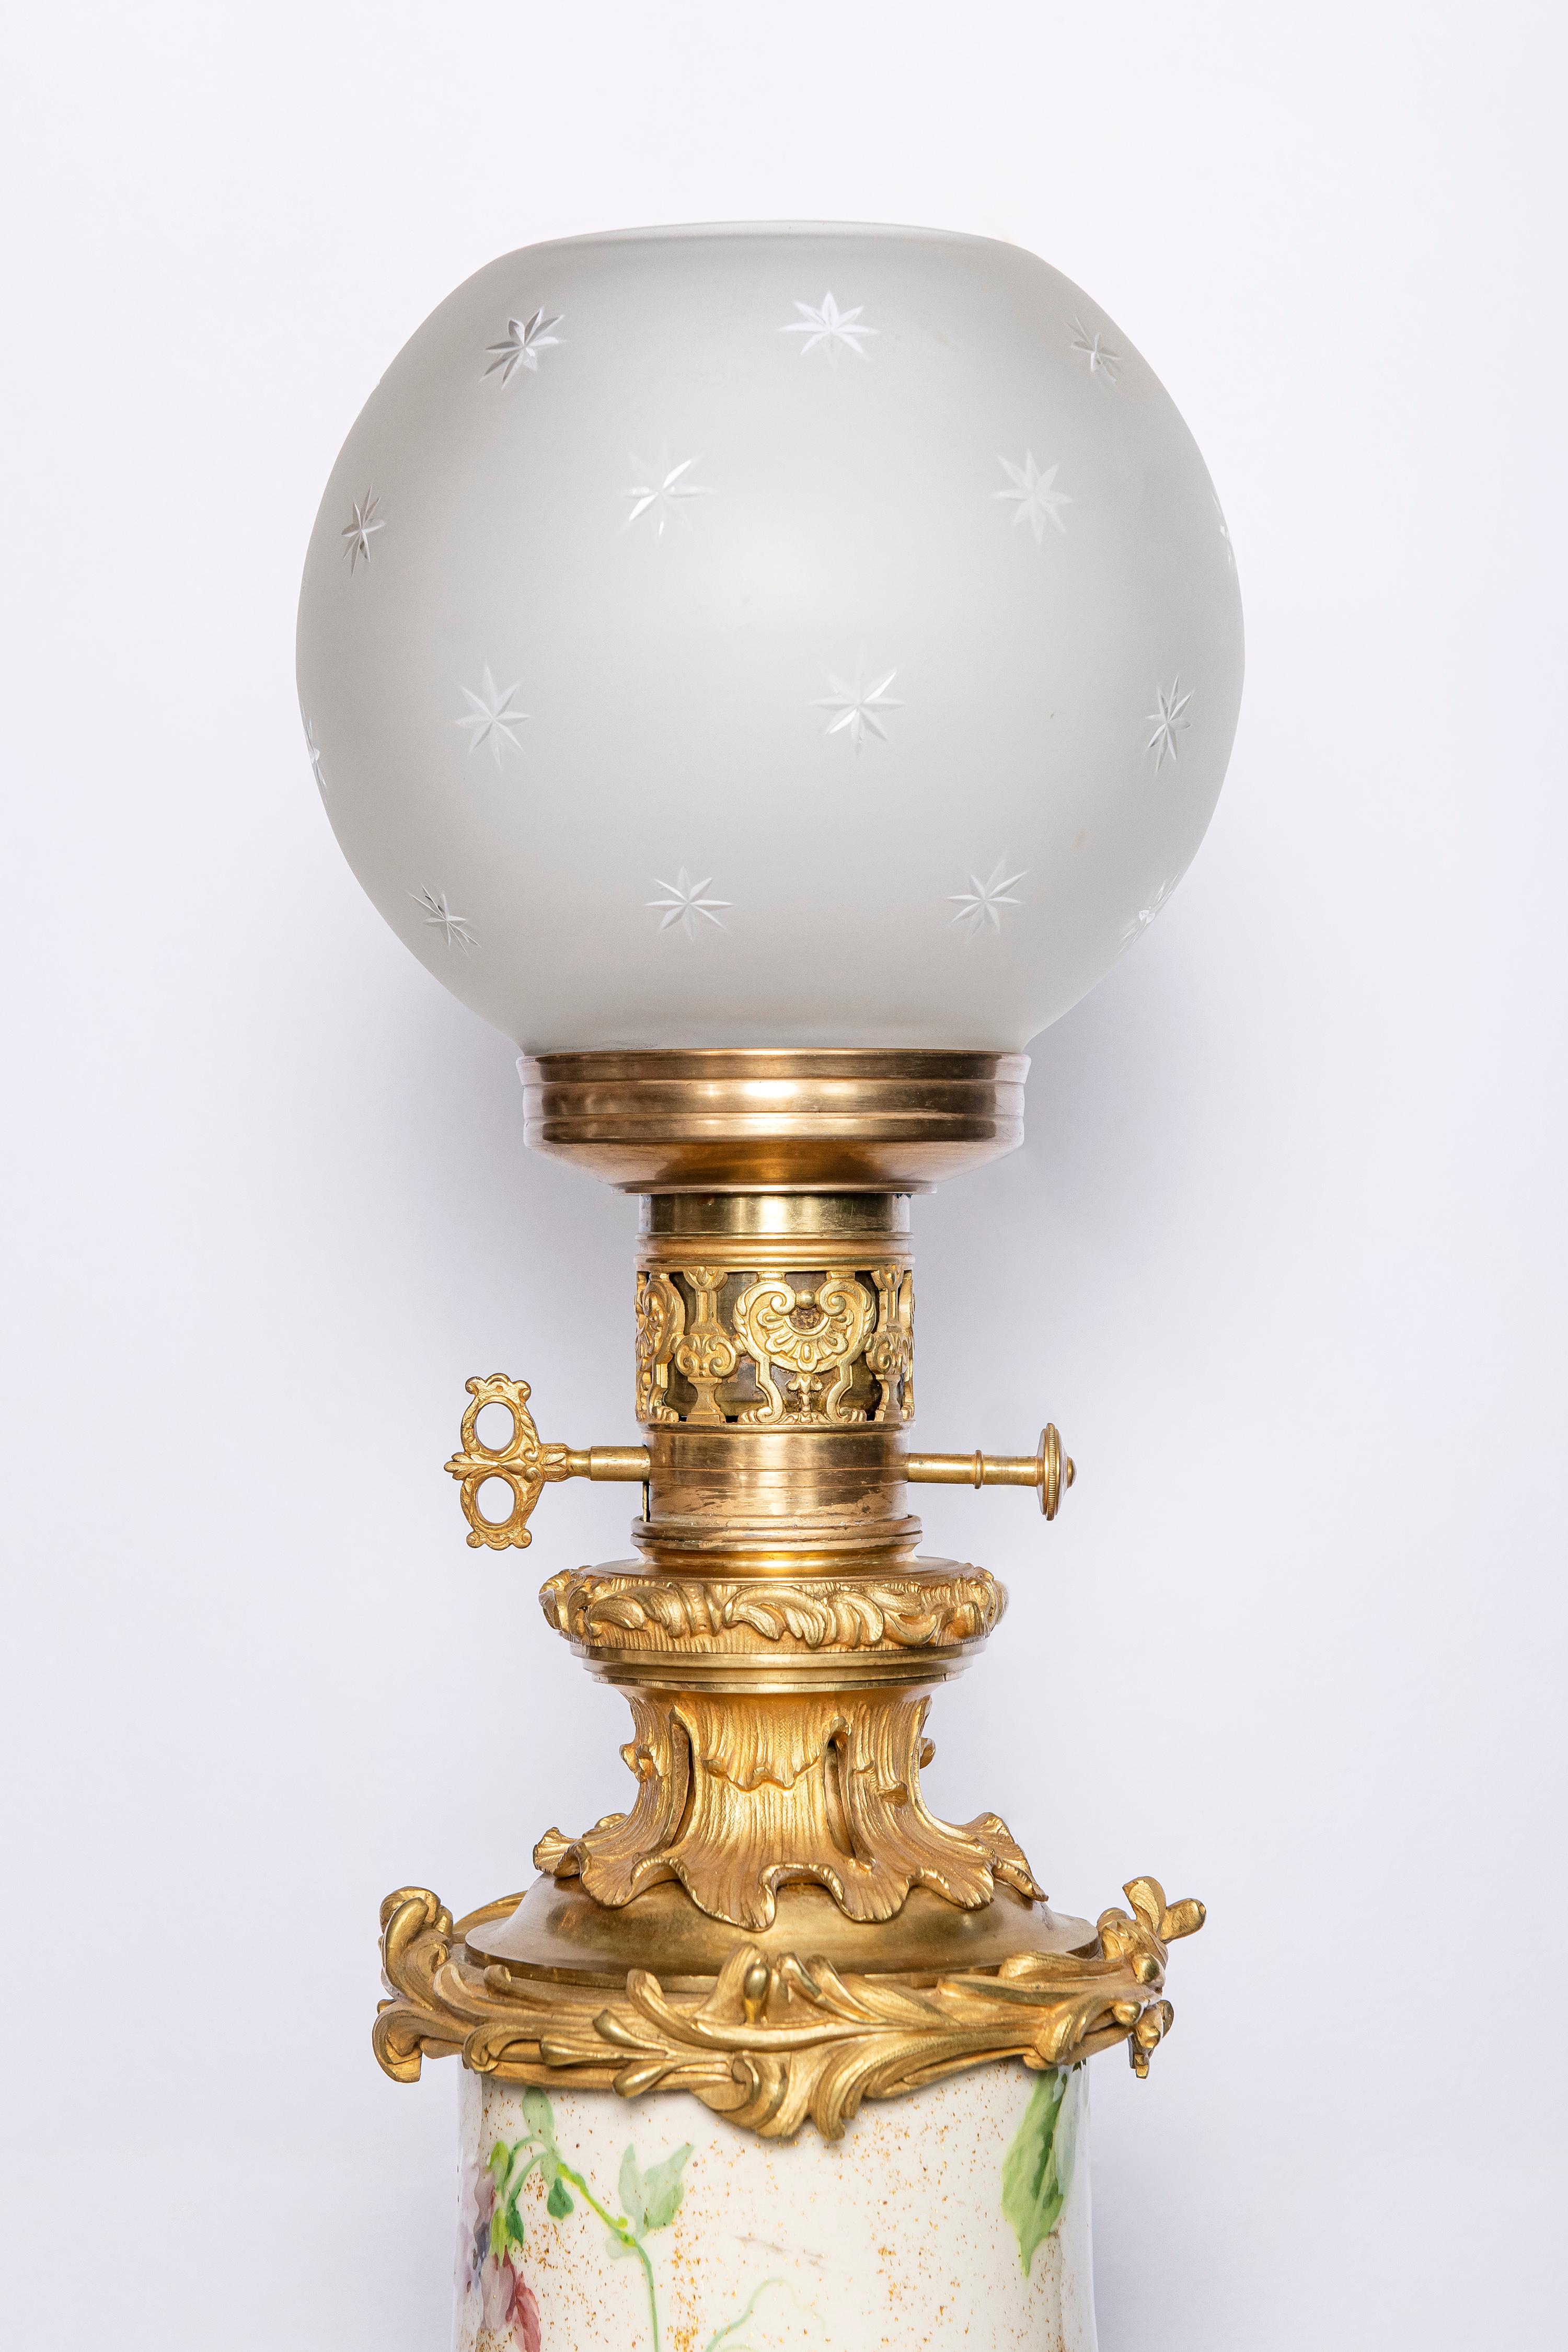 Painted Porcelain, crystal and gilt bronze table lamp. France, circa 1890.